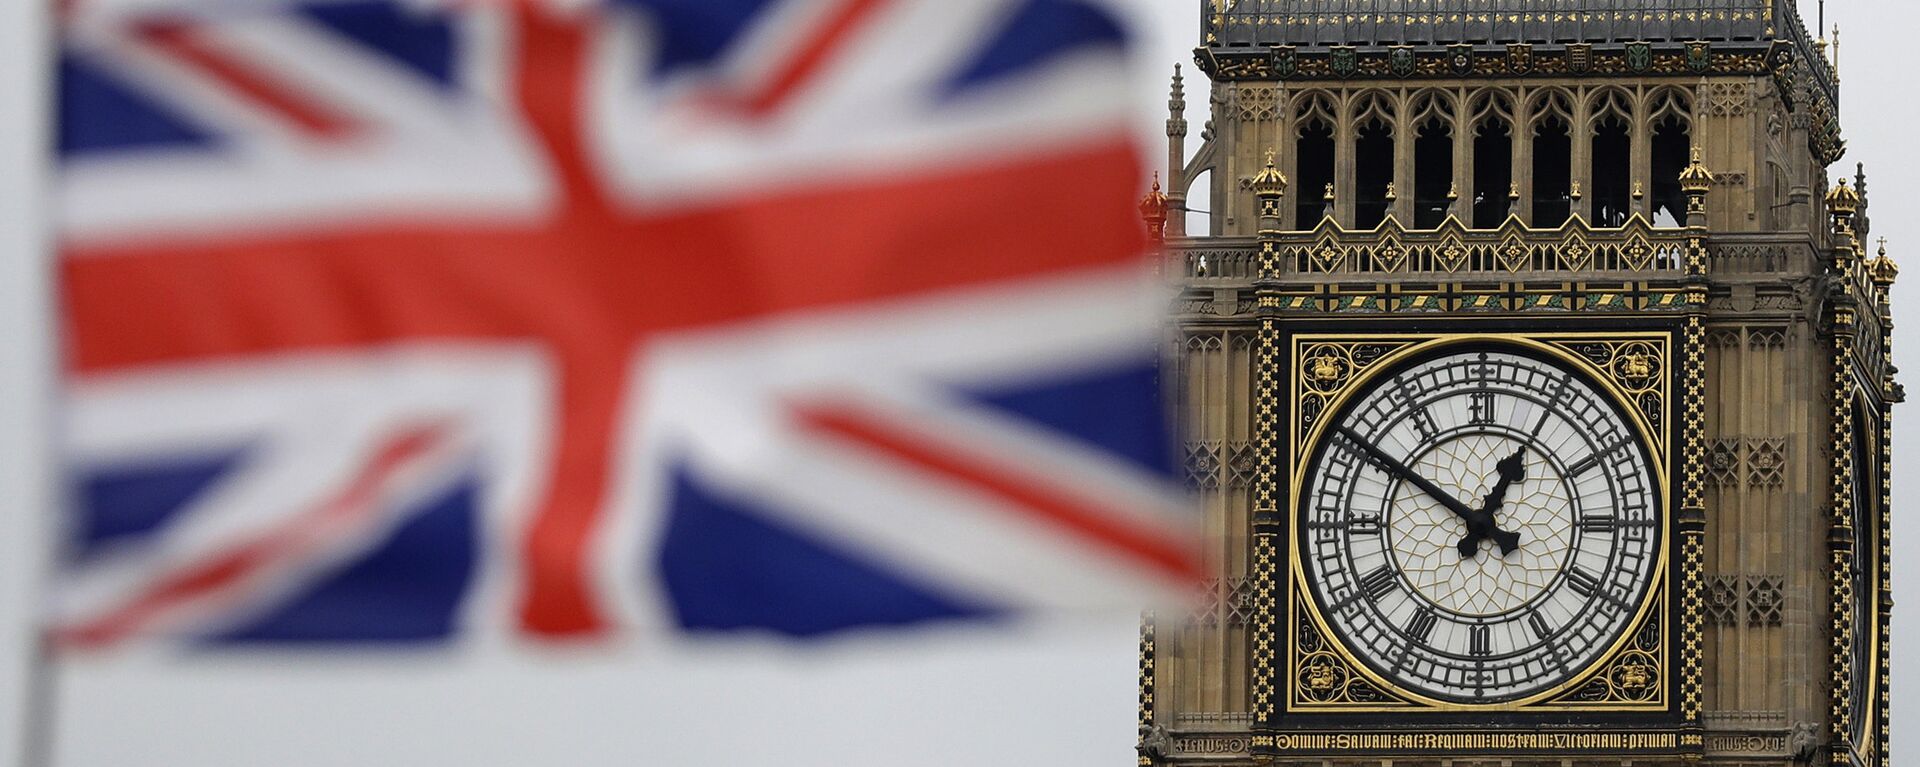 a British flag is blown by the wind near to Big Ben's clock tower in front of the UK Houses of Parliament in central London - Sputnik International, 1920, 04.09.2019